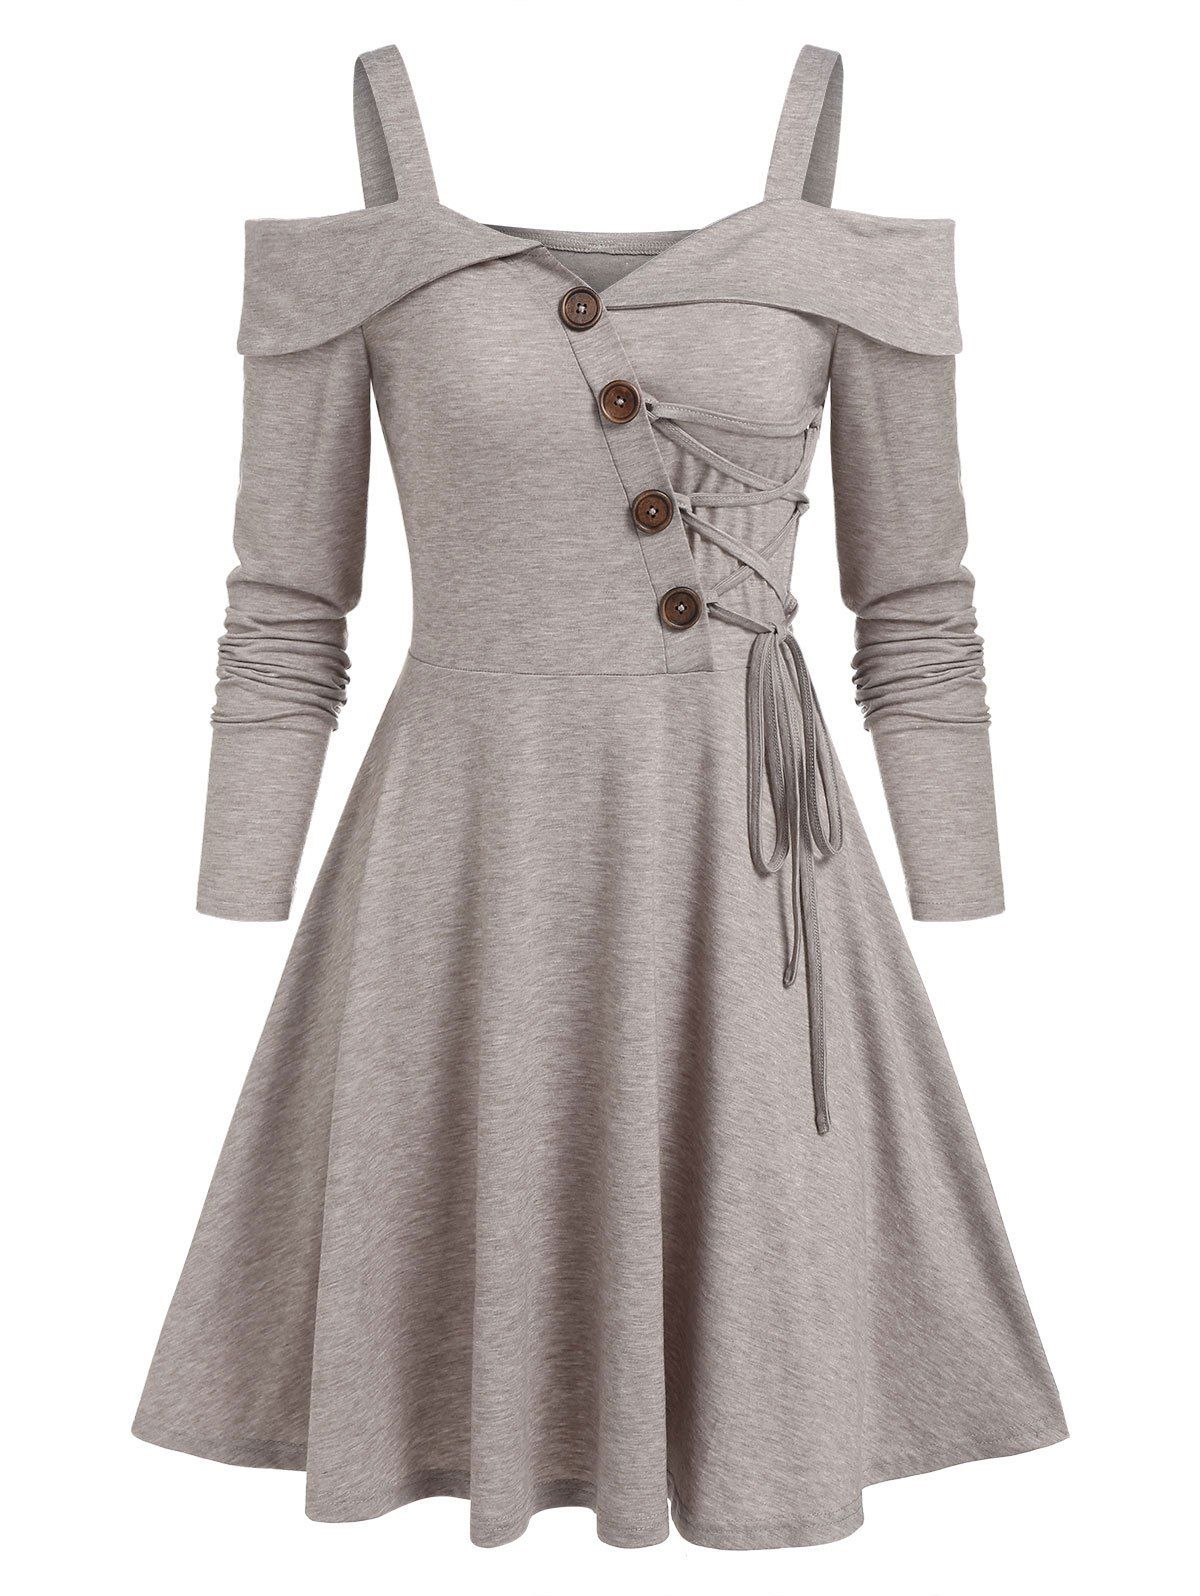 Cold Shoulder Lace-up Heathered Dress - LIGHT COFFEE XXL